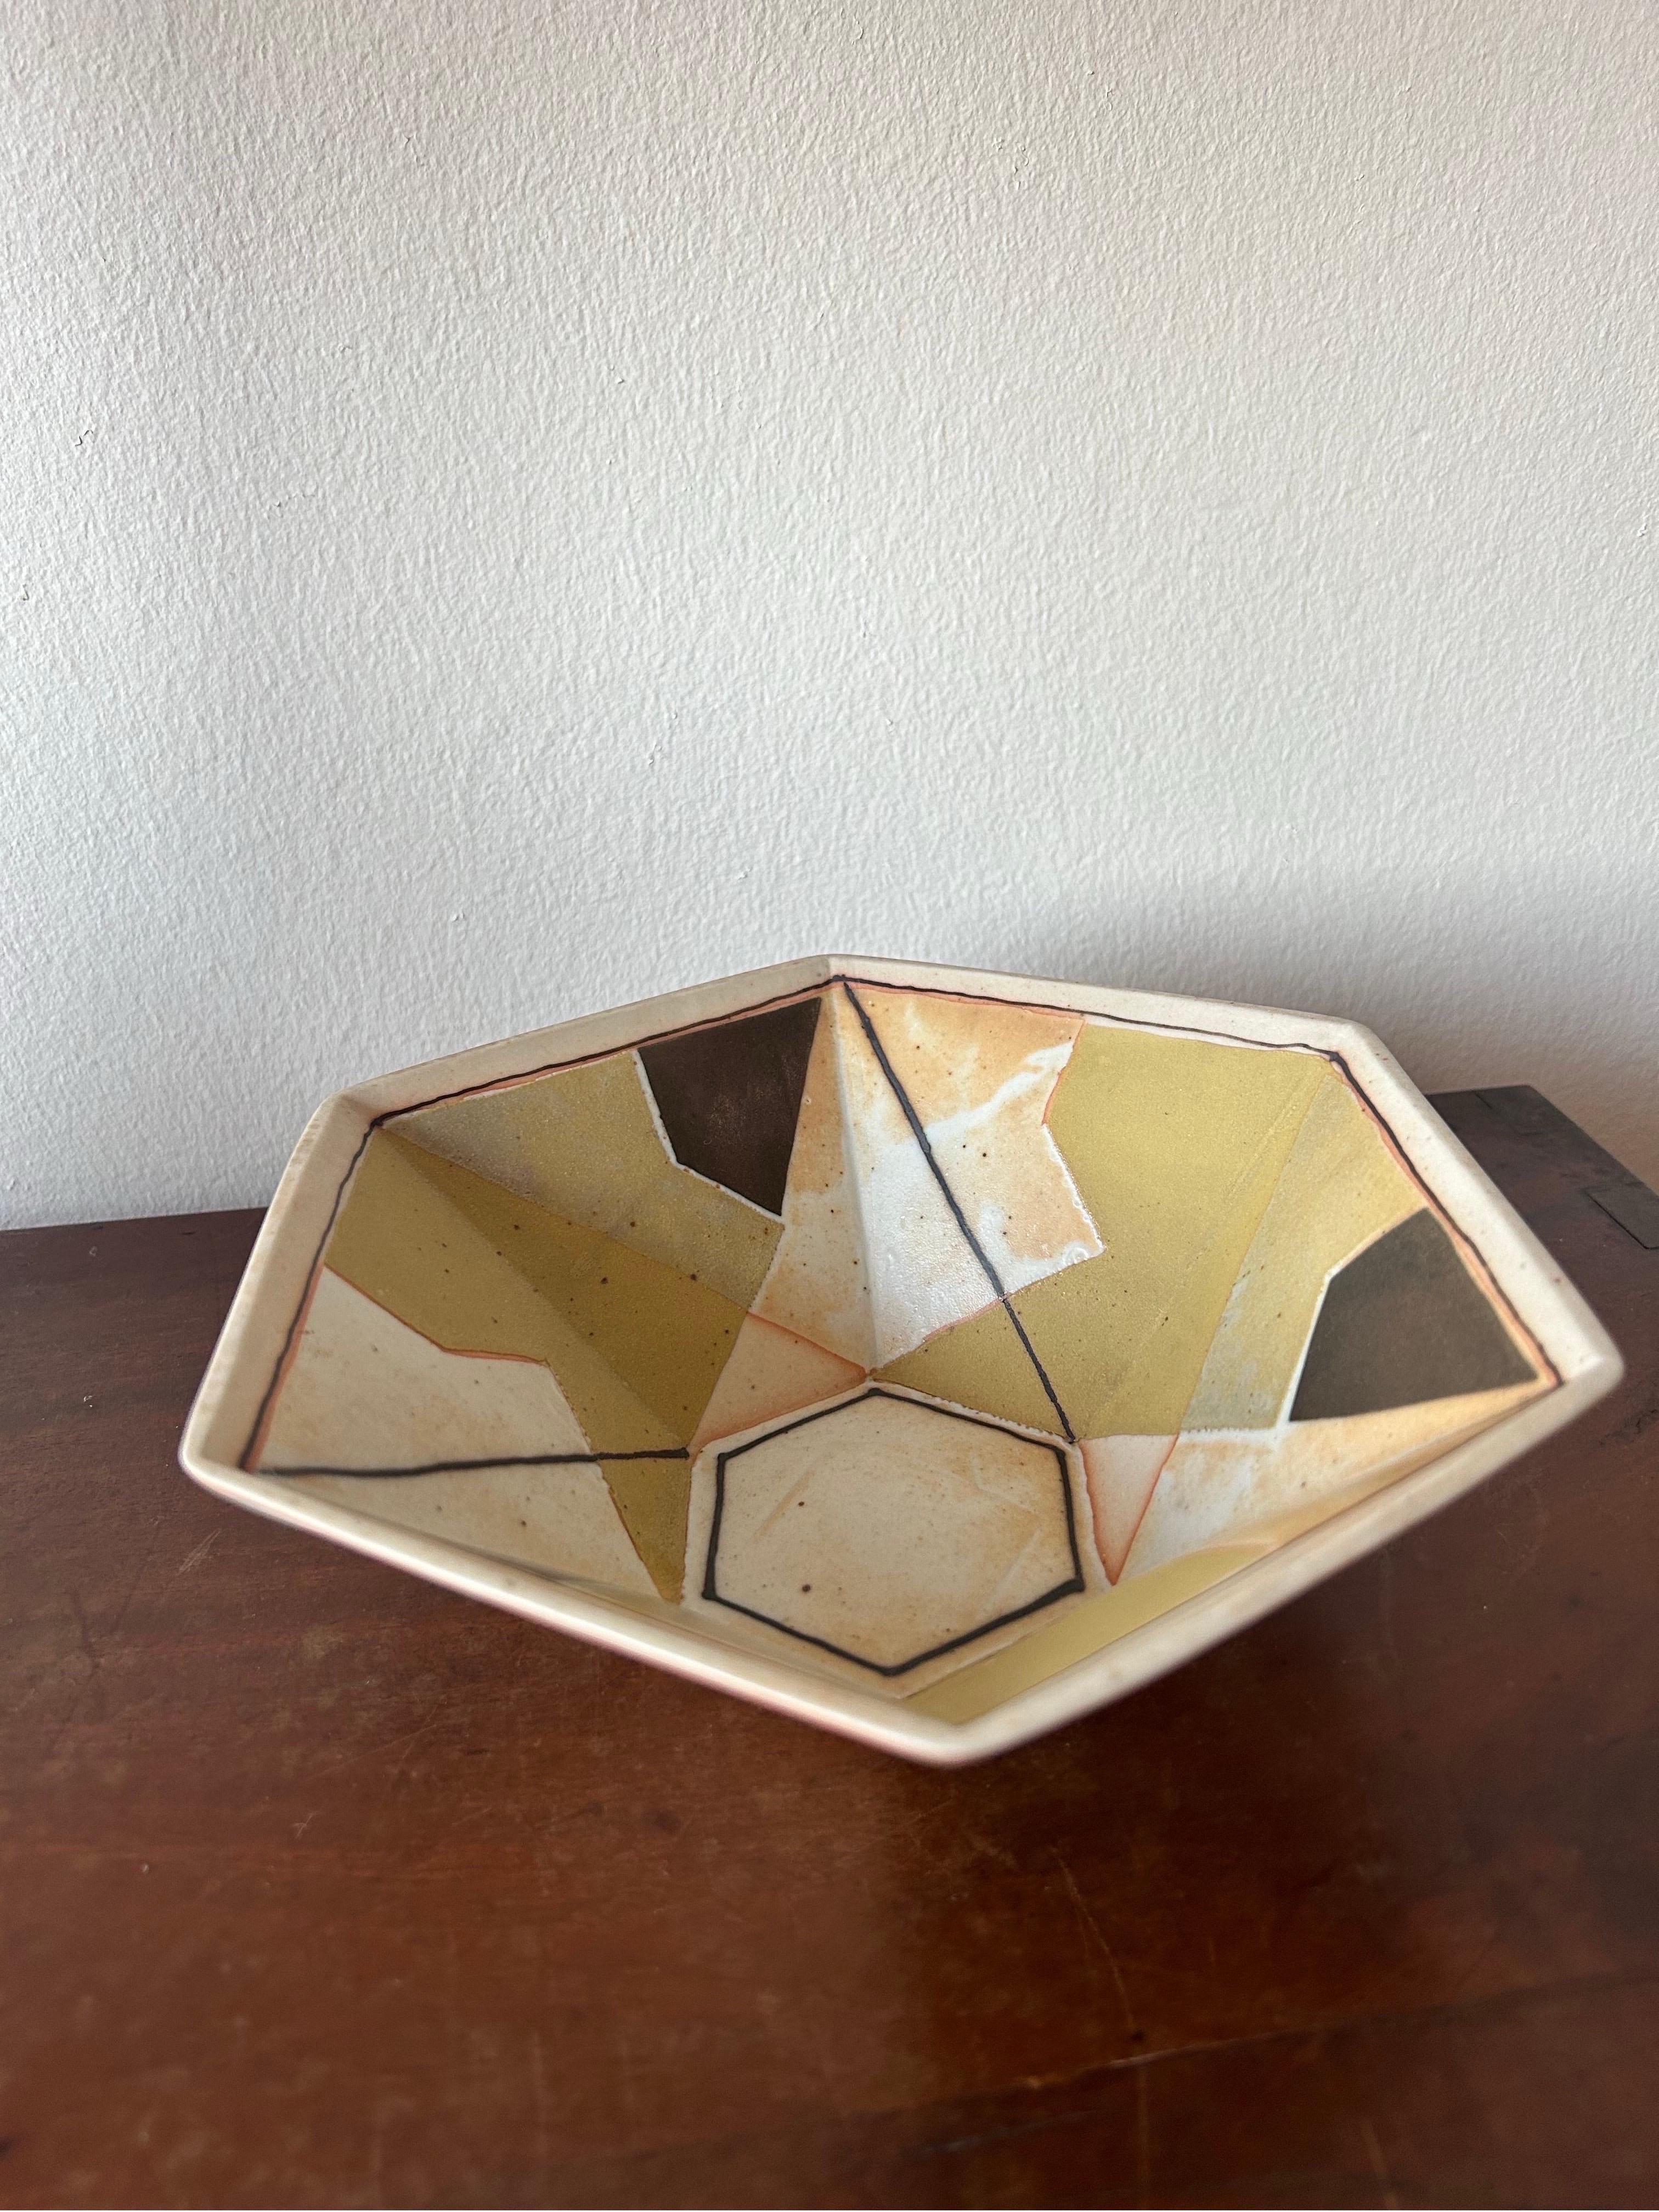 Rare Bodil Manz Unique Bowl, made in Denmark in the 1980’s.
The bowl is made in glazed porcelain with a great structure in different levels.

The ceramist Bodil Manz graduated from the School of Artisans in 1965 and at the Gustavsberg porcelain